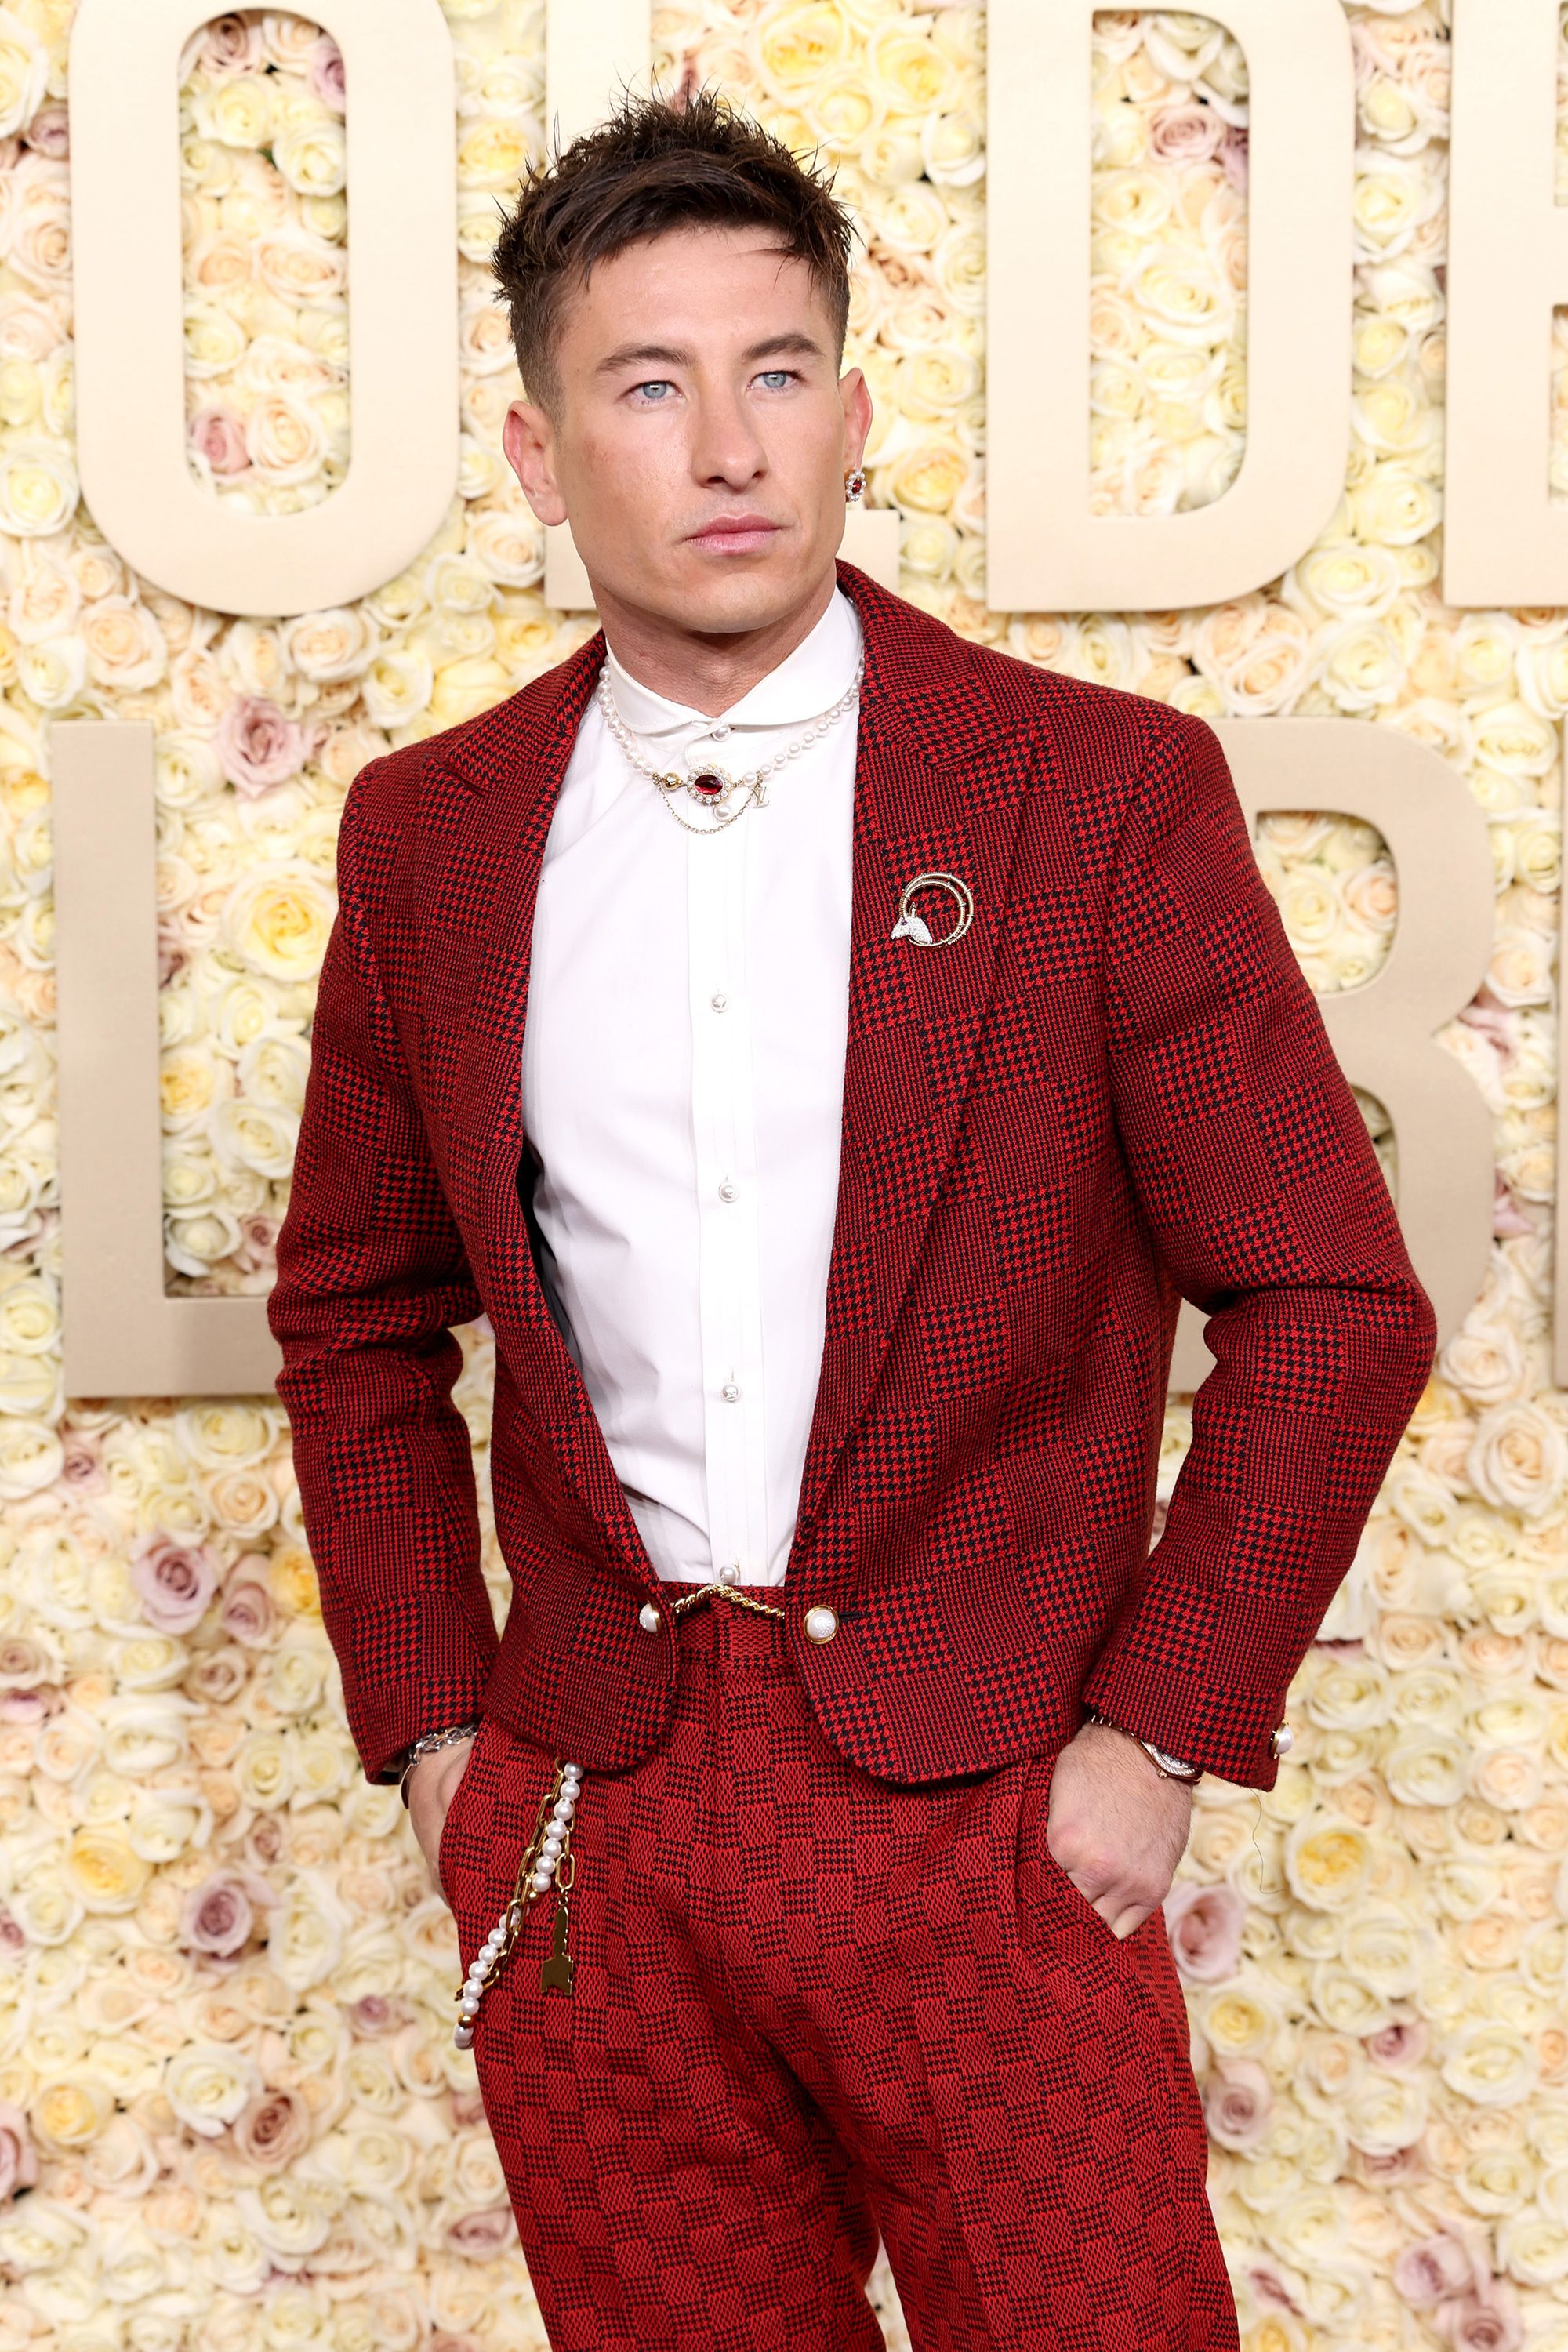 Barry Keoghan sported a red wool evening jacket in Louis Vuitton’s signature Damier pattern. He completed the look with checkered red pants from the label’s Spring-Summer 2024 collection, complete with a pearl belt chain, necklace and earring.